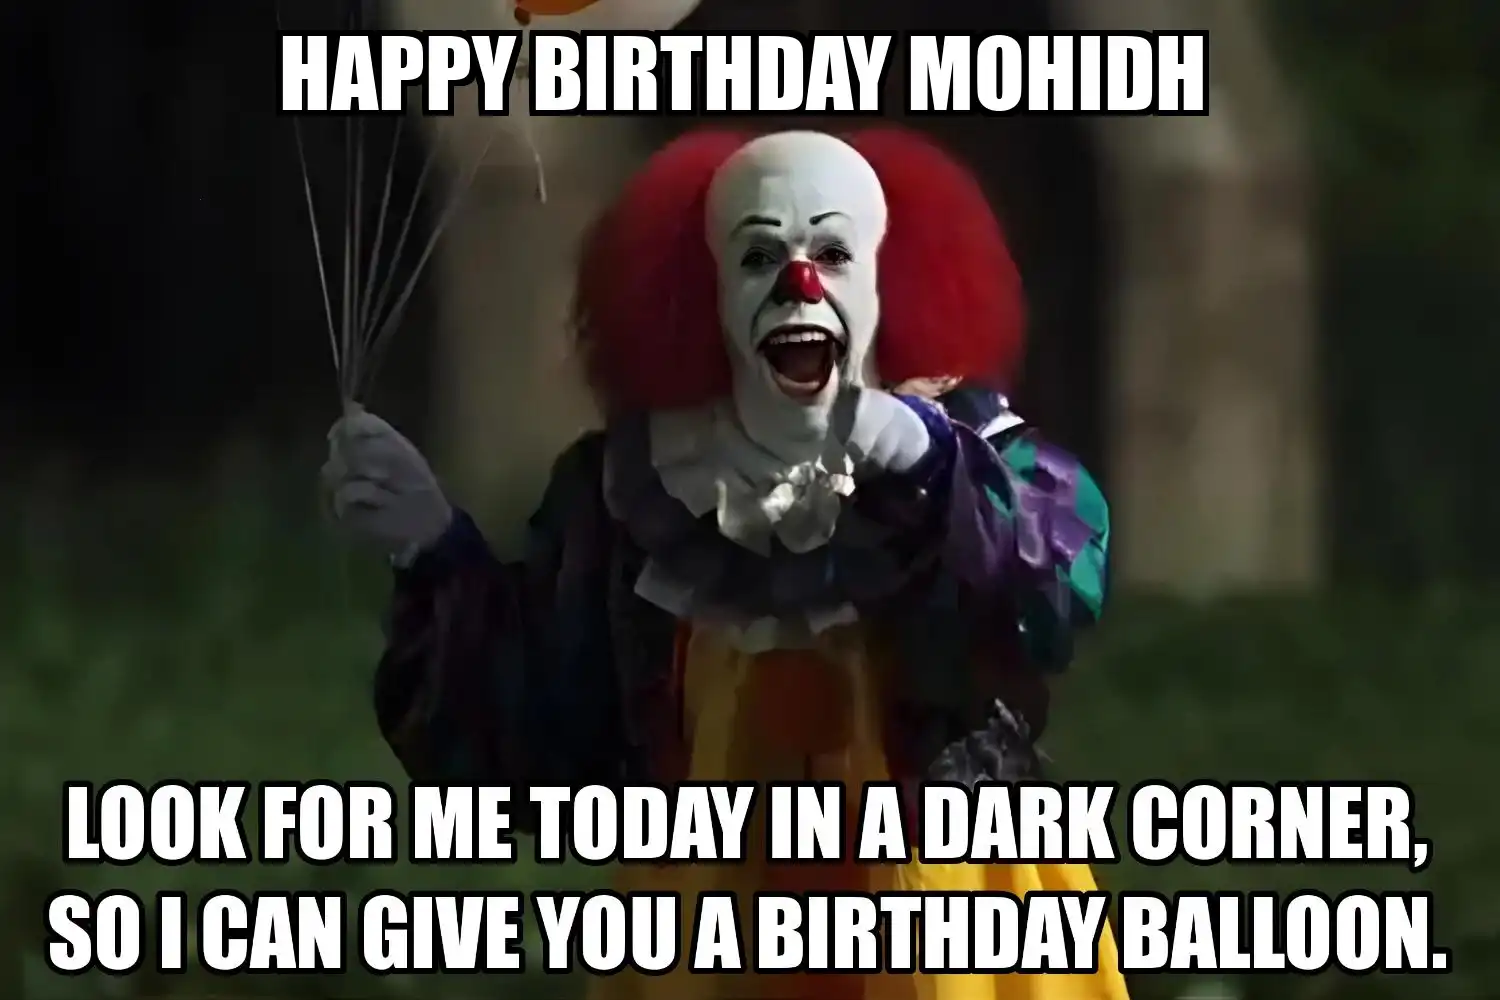 Happy Birthday Mohidh I Can Give You A Balloon Meme